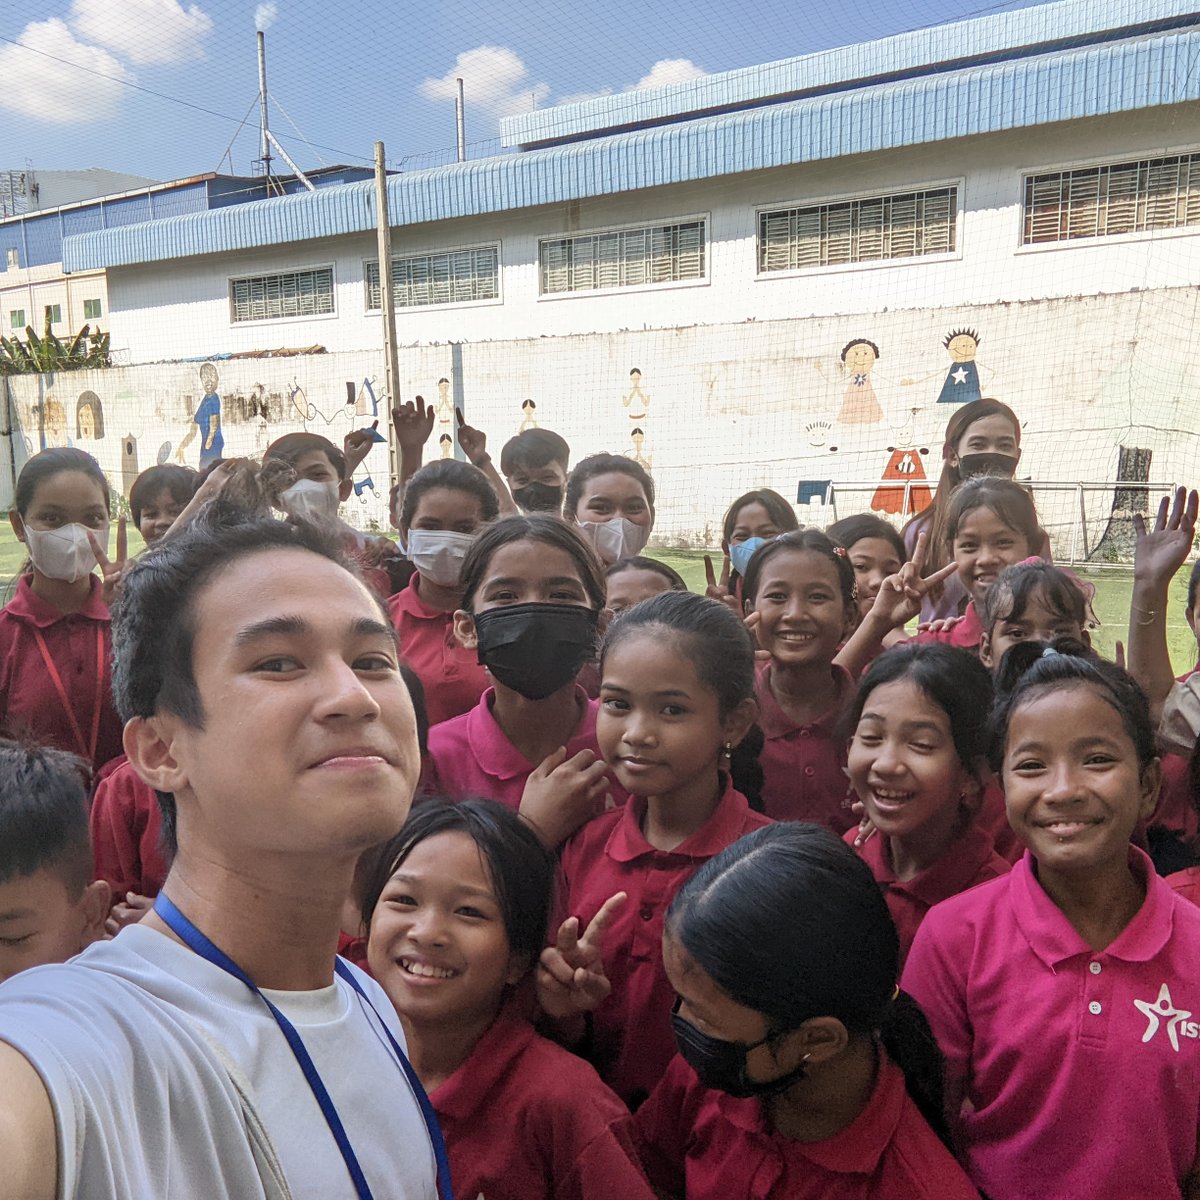 There’s no better way to learn about our mission than visiting us in Cambodia. #UWCSEA grad, Binh, was interested in gaining first-hand experience. During their visit, Binh jumped right in - playing fun games. If you’re interested in visiting, contact info@isfcambodia.org.